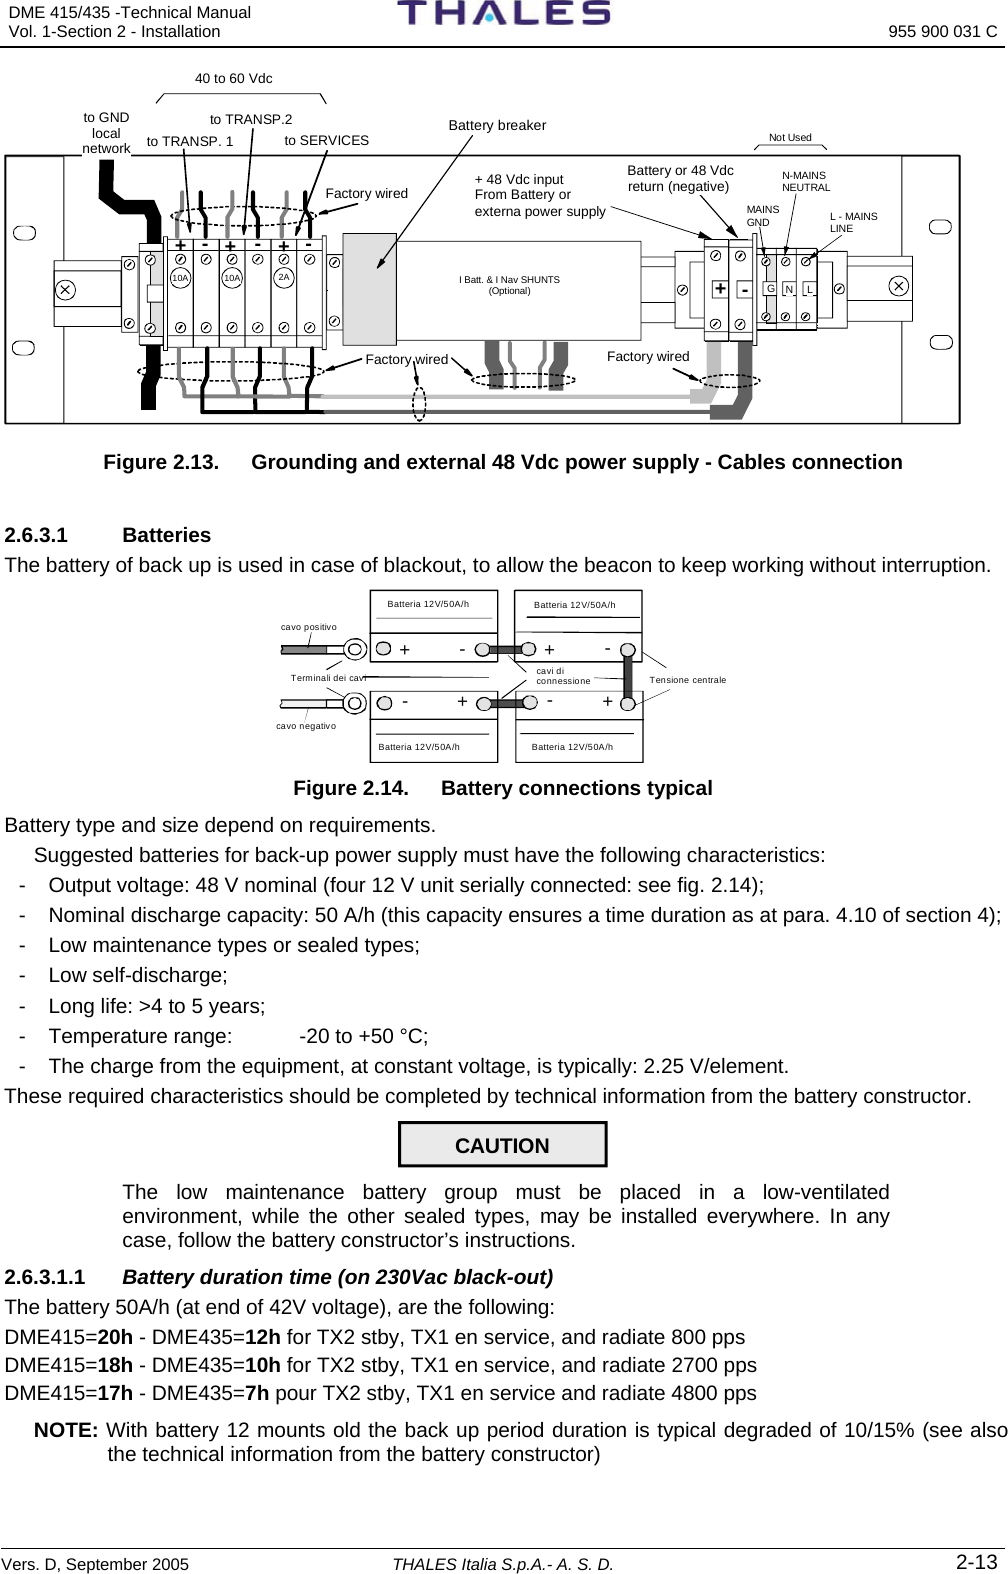 DME 415/435 -Technical Manual  Vol. 1-Section 2 - Installation  955 900 031 C Vers. D, September 2005 THALES Italia S.p.A.- A. S. D. 2-13 + 48 Vdc inputFrom Battery or externa power supply +- Battery or 48 Vdc return (negative)MAINSGND L - MAINSLINE Factory wiredFactory wiredFactory wired+++10A 2A10Ato TRANSP. 1to TRANSP.2to SERVICES40 to 60 Vdc Not UsedGN L---to GNDlocalnetworkN-MAINSNEUTRALBattery breaker  I Batt. &amp; I Nav SHUNTS(Optional) Figure 2.13.   Grounding and external 48 Vdc power supply - Cables connection  2.6.3.1 Batteries The battery of back up is used in case of blackout, to allow the beacon to keep working without interruption.  +-+-+-+-Terminali dei cavicavo positivo cavi di connessioneBatteria 12V/50A/h Tensione centrale cavo negativoBatteria 12V/50A/h Batteria 12V/50A/h Batteria 12V/50A/h  Figure 2.14.   Battery connections typical Battery type and size depend on requirements. Suggested batteries for back-up power supply must have the following characteristics: -  Output voltage: 48 V nominal (four 12 V unit serially connected: see fig. 2.14); -  Nominal discharge capacity: 50 A/h (this capacity ensures a time duration as at para. 4.10 of section 4); -  Low maintenance types or sealed types; - Low self-discharge; -  Long life: &gt;4 to 5 years; -  Temperature range:   -20 to +50 °C; -  The charge from the equipment, at constant voltage, is typically: 2.25 V/element. These required characteristics should be completed by technical information from the battery constructor. CAUTION  The low maintenance battery group must be placed in a low-ventilated environment, while the other sealed types, may be installed everywhere. In any case, follow the battery constructor’s instructions. 2.6.3.1.1  Battery duration time (on 230Vac black-out)  The battery 50A/h (at end of 42V voltage), are the following:   DME415=20h - DME435=12h for TX2 stby, TX1 en service, and radiate 800 pps   DME415=18h - DME435=10h for TX2 stby, TX1 en service, and radiate 2700 pps   DME415=17h - DME435=7h pour TX2 stby, TX1 en service and radiate 4800 pps    NOTE: With battery 12 mounts old the back up period duration is typical degraded of 10/15% (see also the technical information from the battery constructor) 